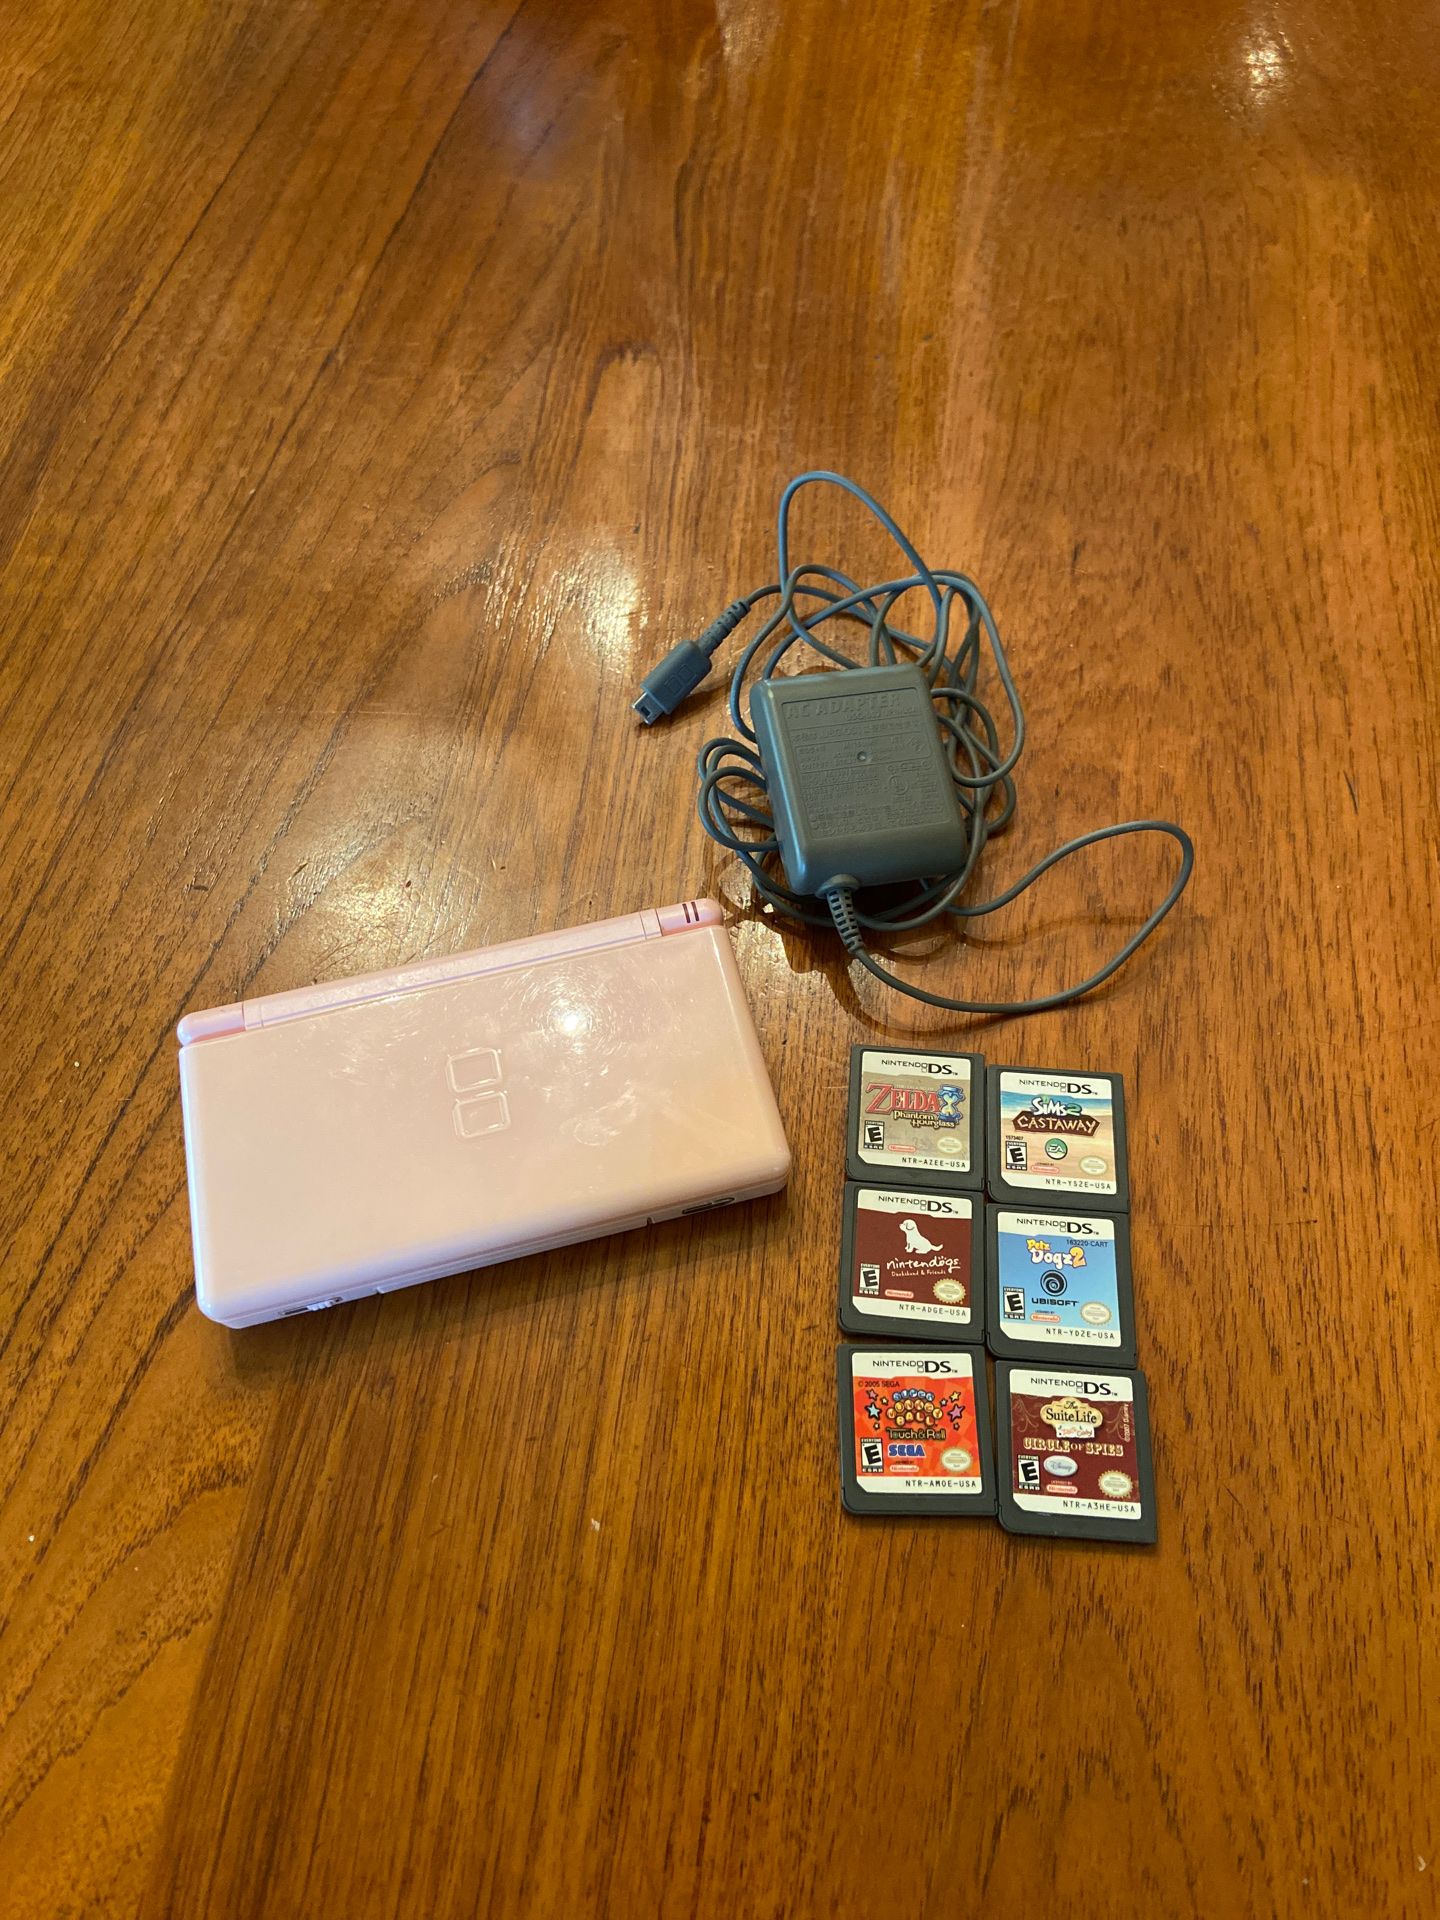 Nintendo DS lite with 6 games